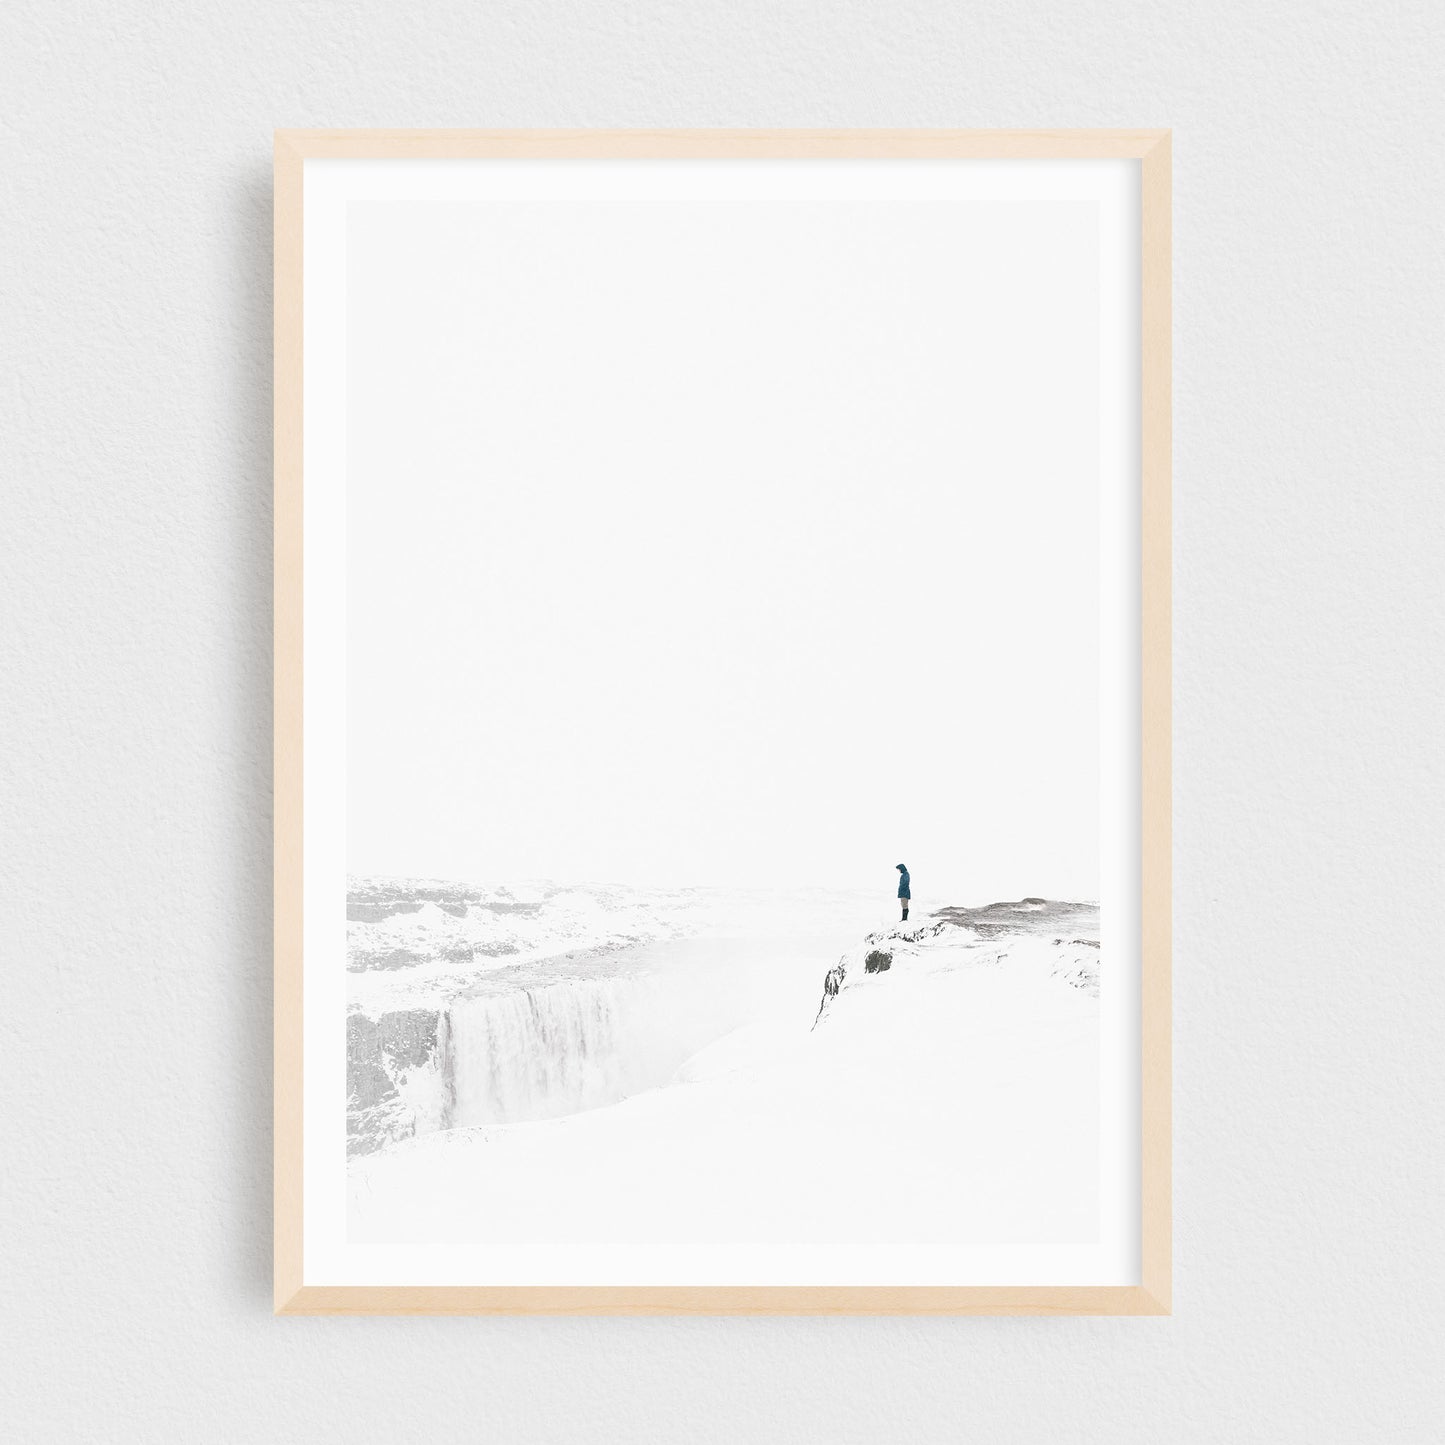 Iceland fine art photography print featuring Dettifoss waterfall in winter, in a maple frame